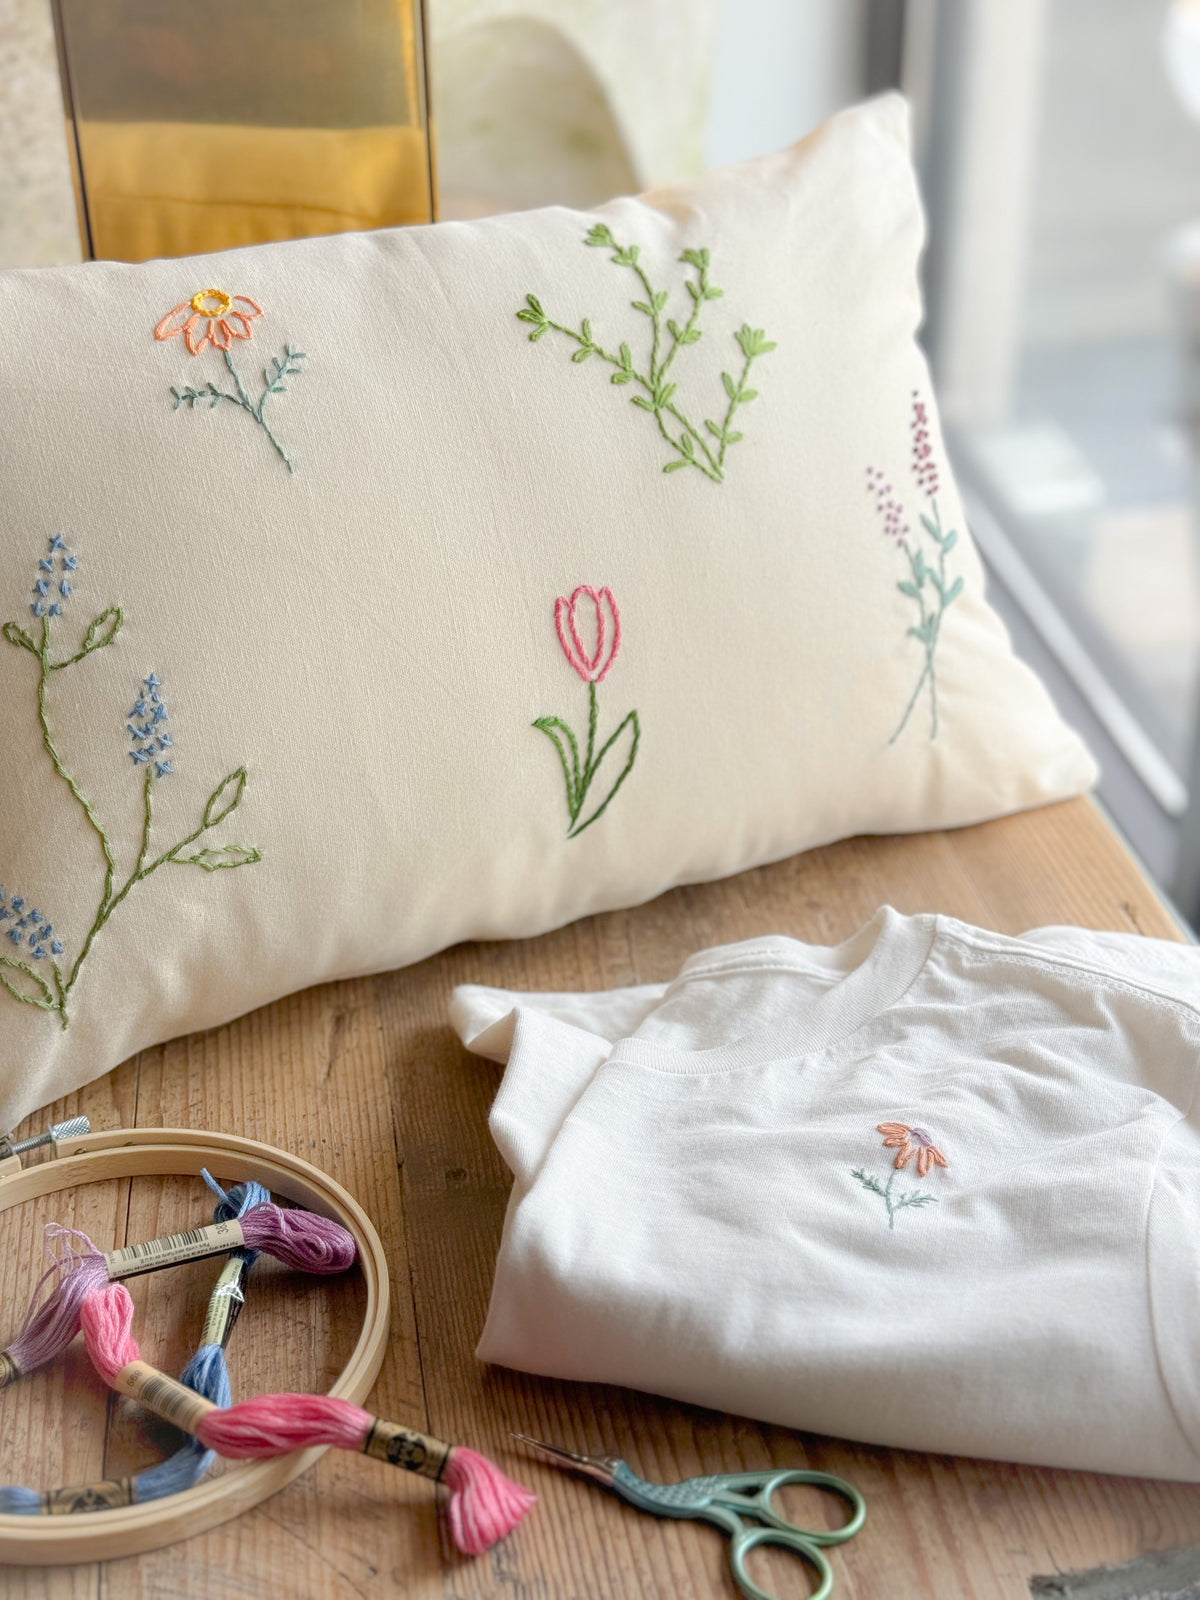 June 8th – Houston All day Option Botanical Stitches &amp; Textures Hand Embroidery Class with Hibiscus Linens